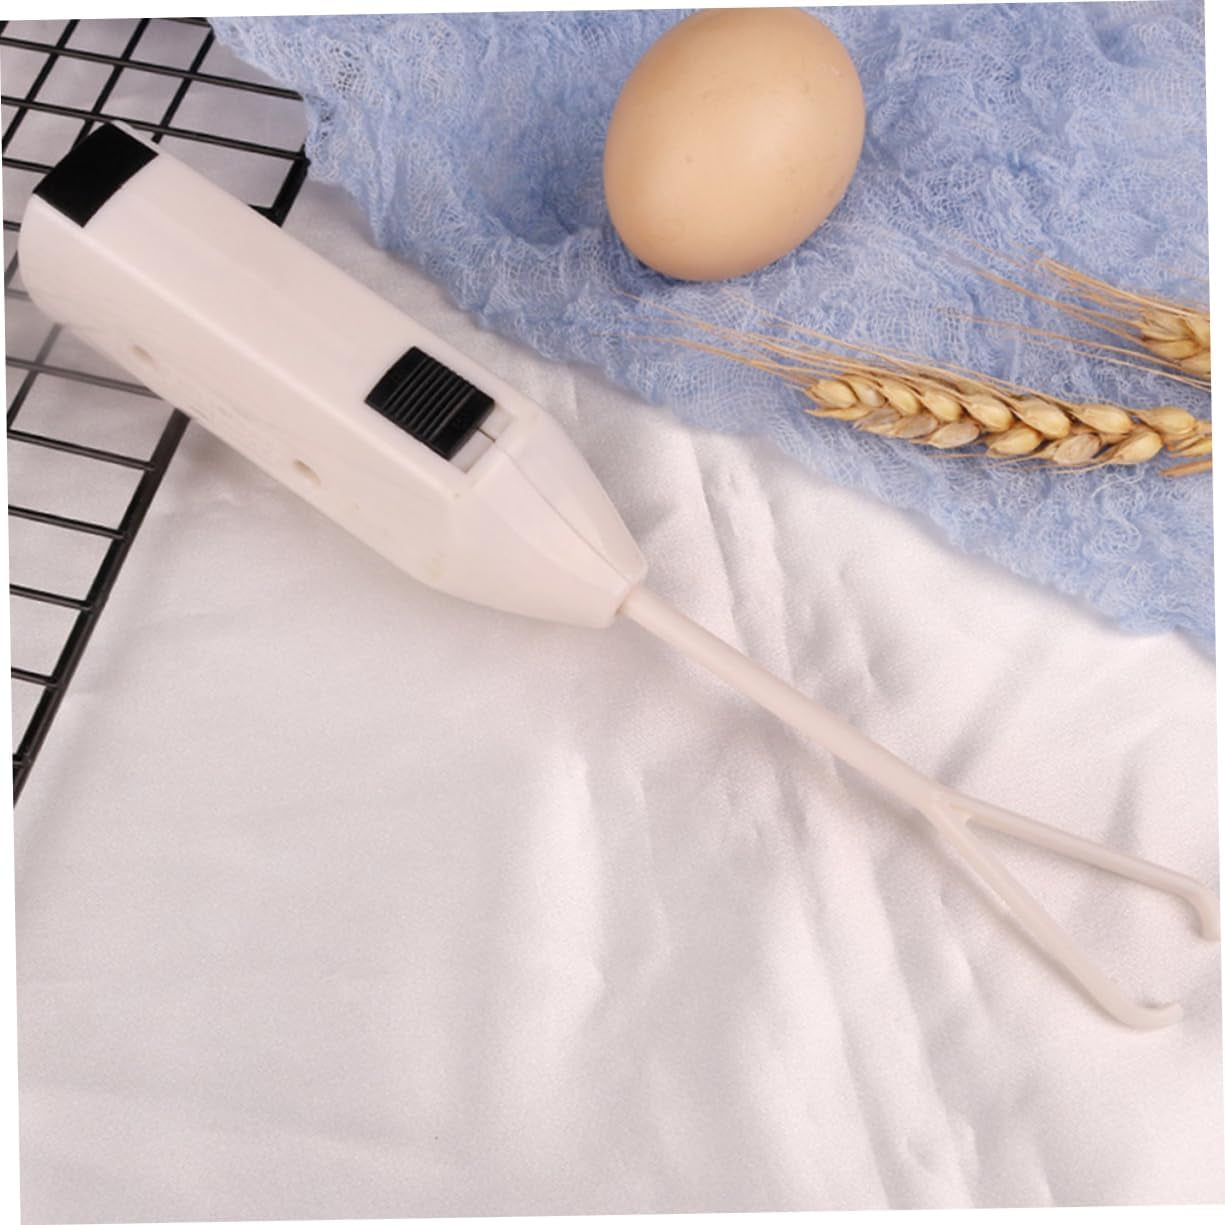 2Pcs Electric Egg Beater Drink Blender Baking Mixer Drink Coffee Mixer Latte Frother Egg Stirrer Cake Electric Beater Cake Mixer Egg Blender Kitchen Foam Machine White Mini Plastic  BESPORTBLE   